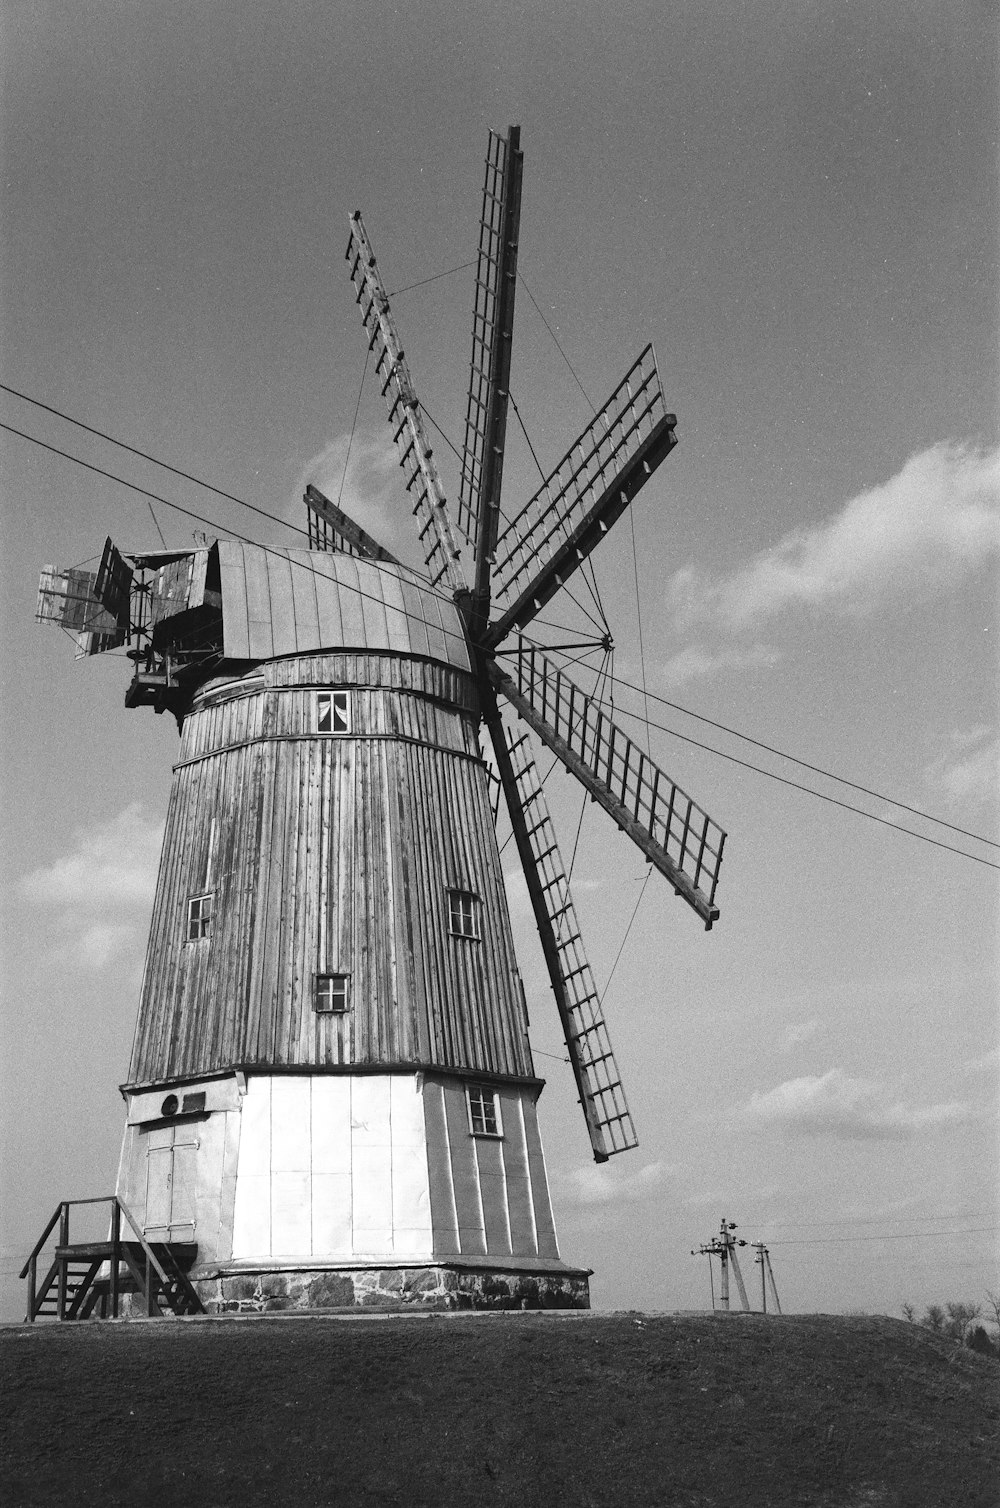 black and white windmill under cloudy sky